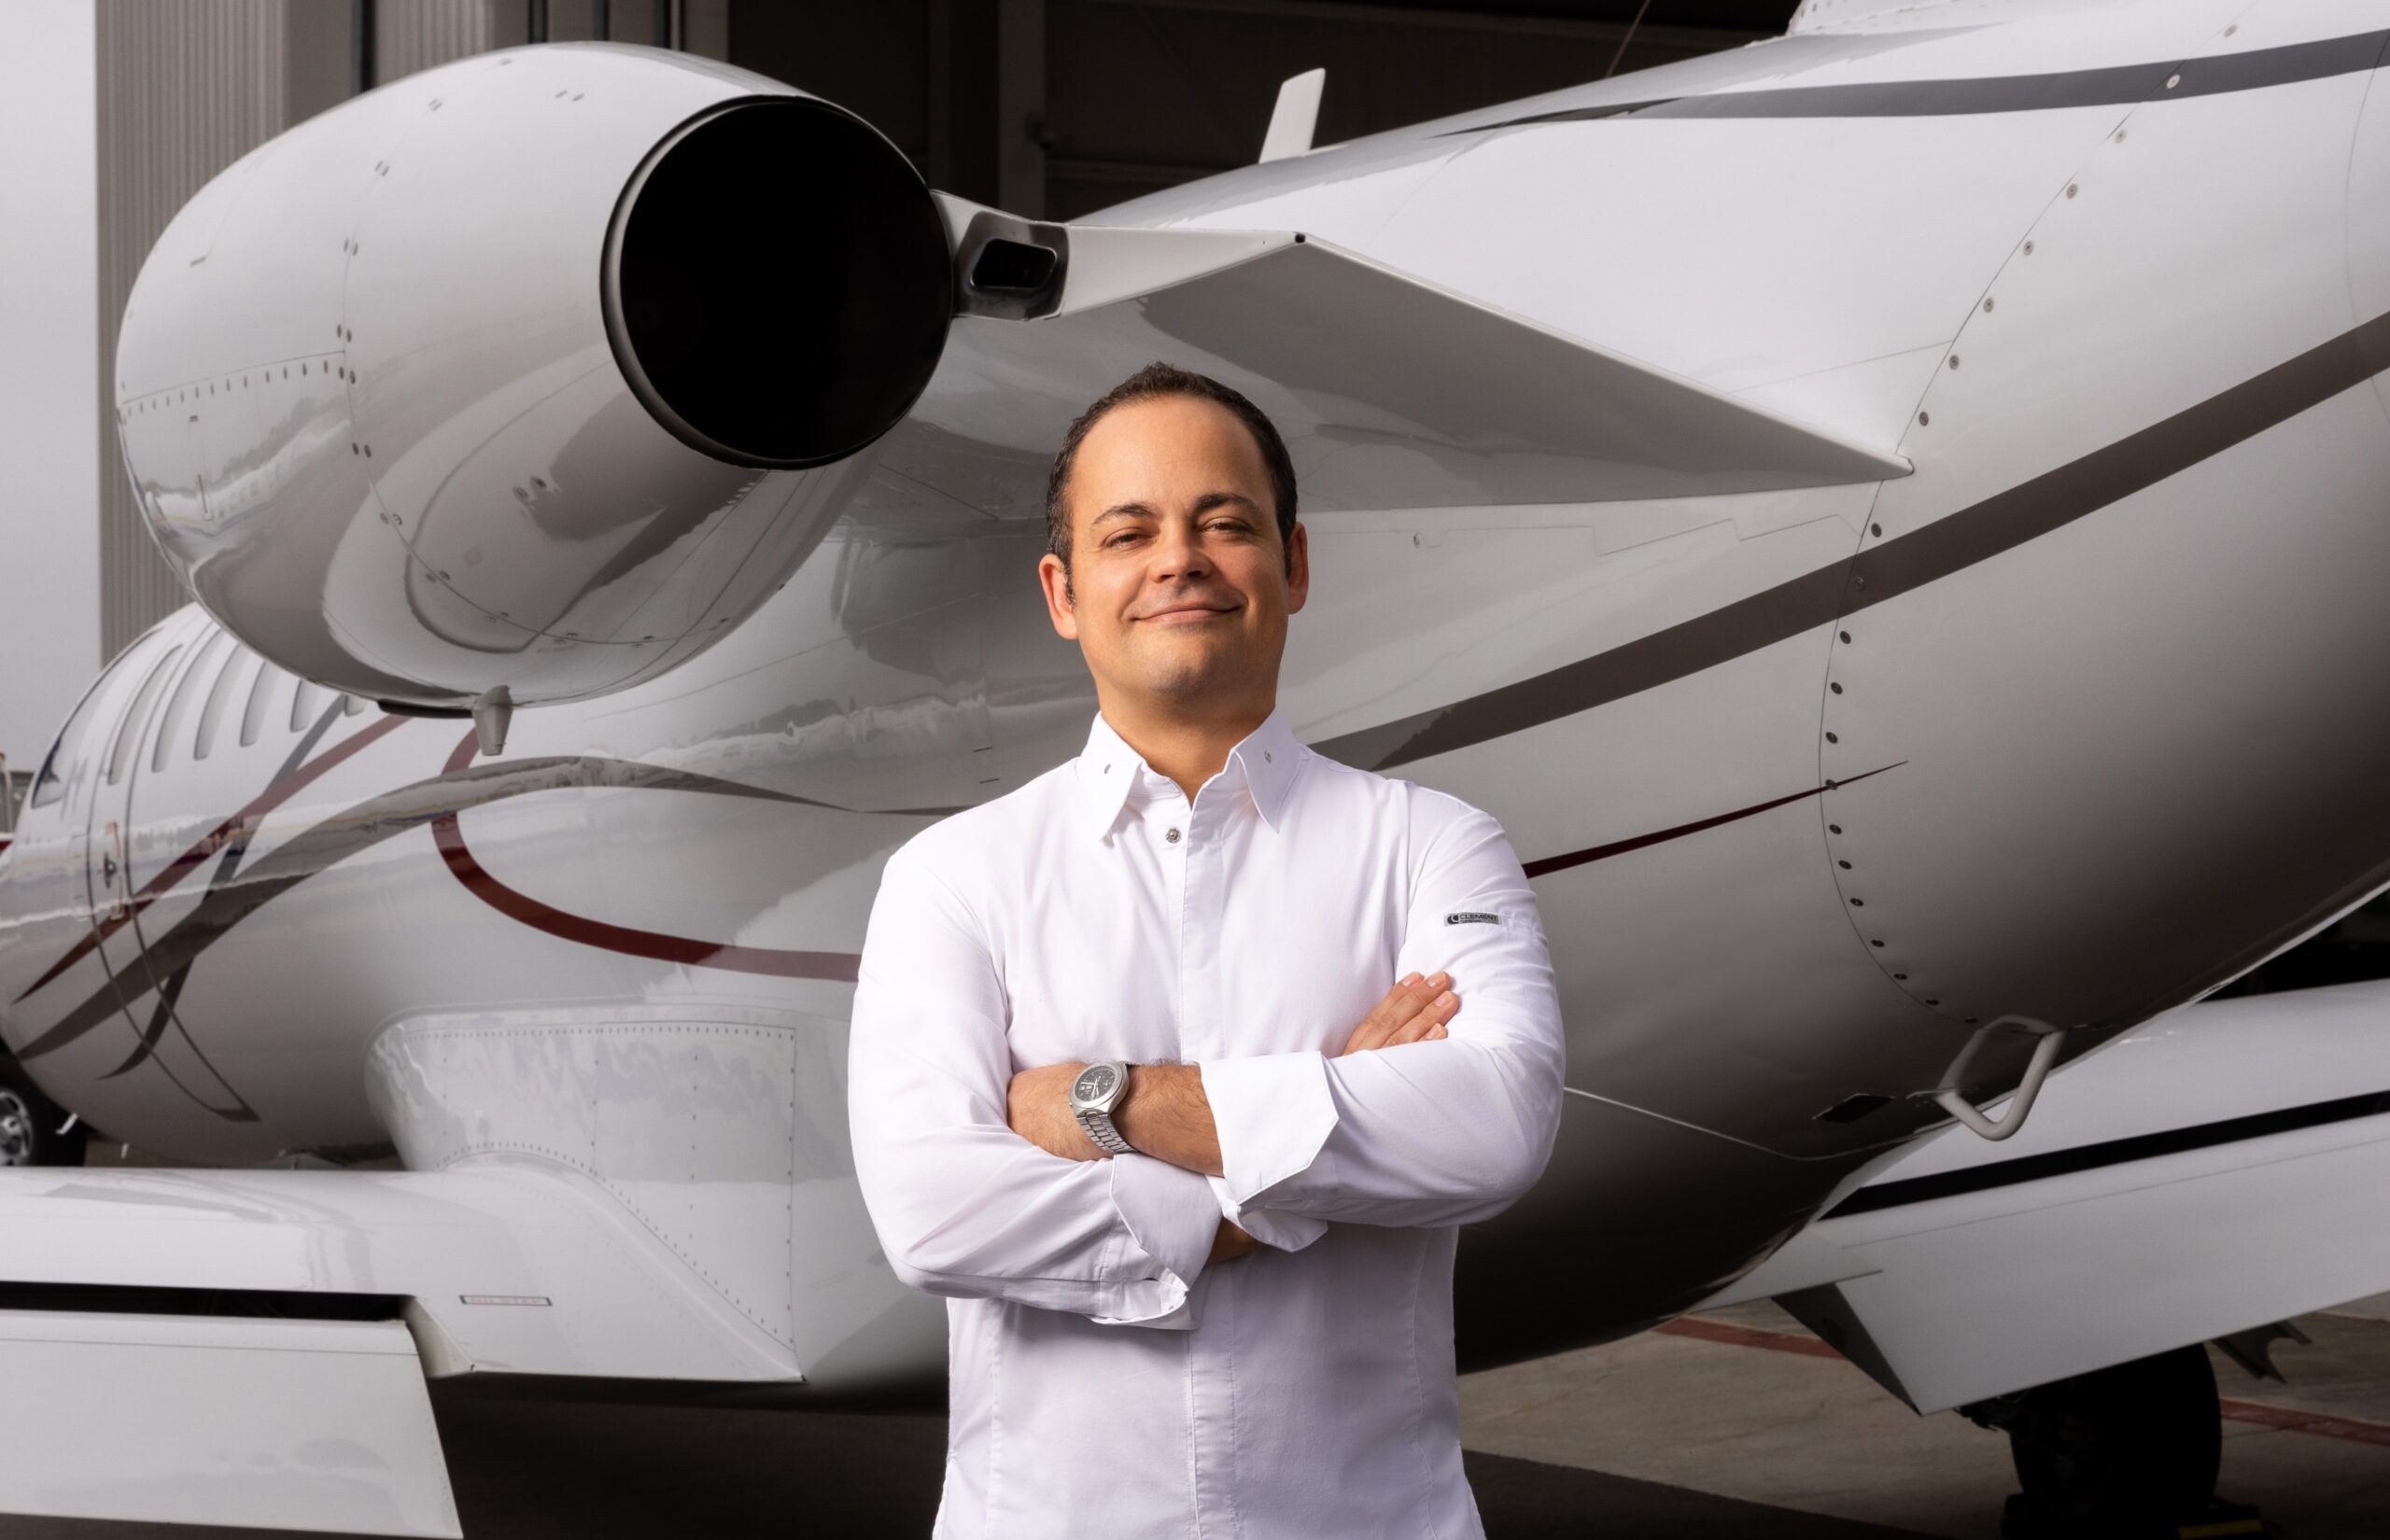 Chef Roberto Alcocer in front of private jet